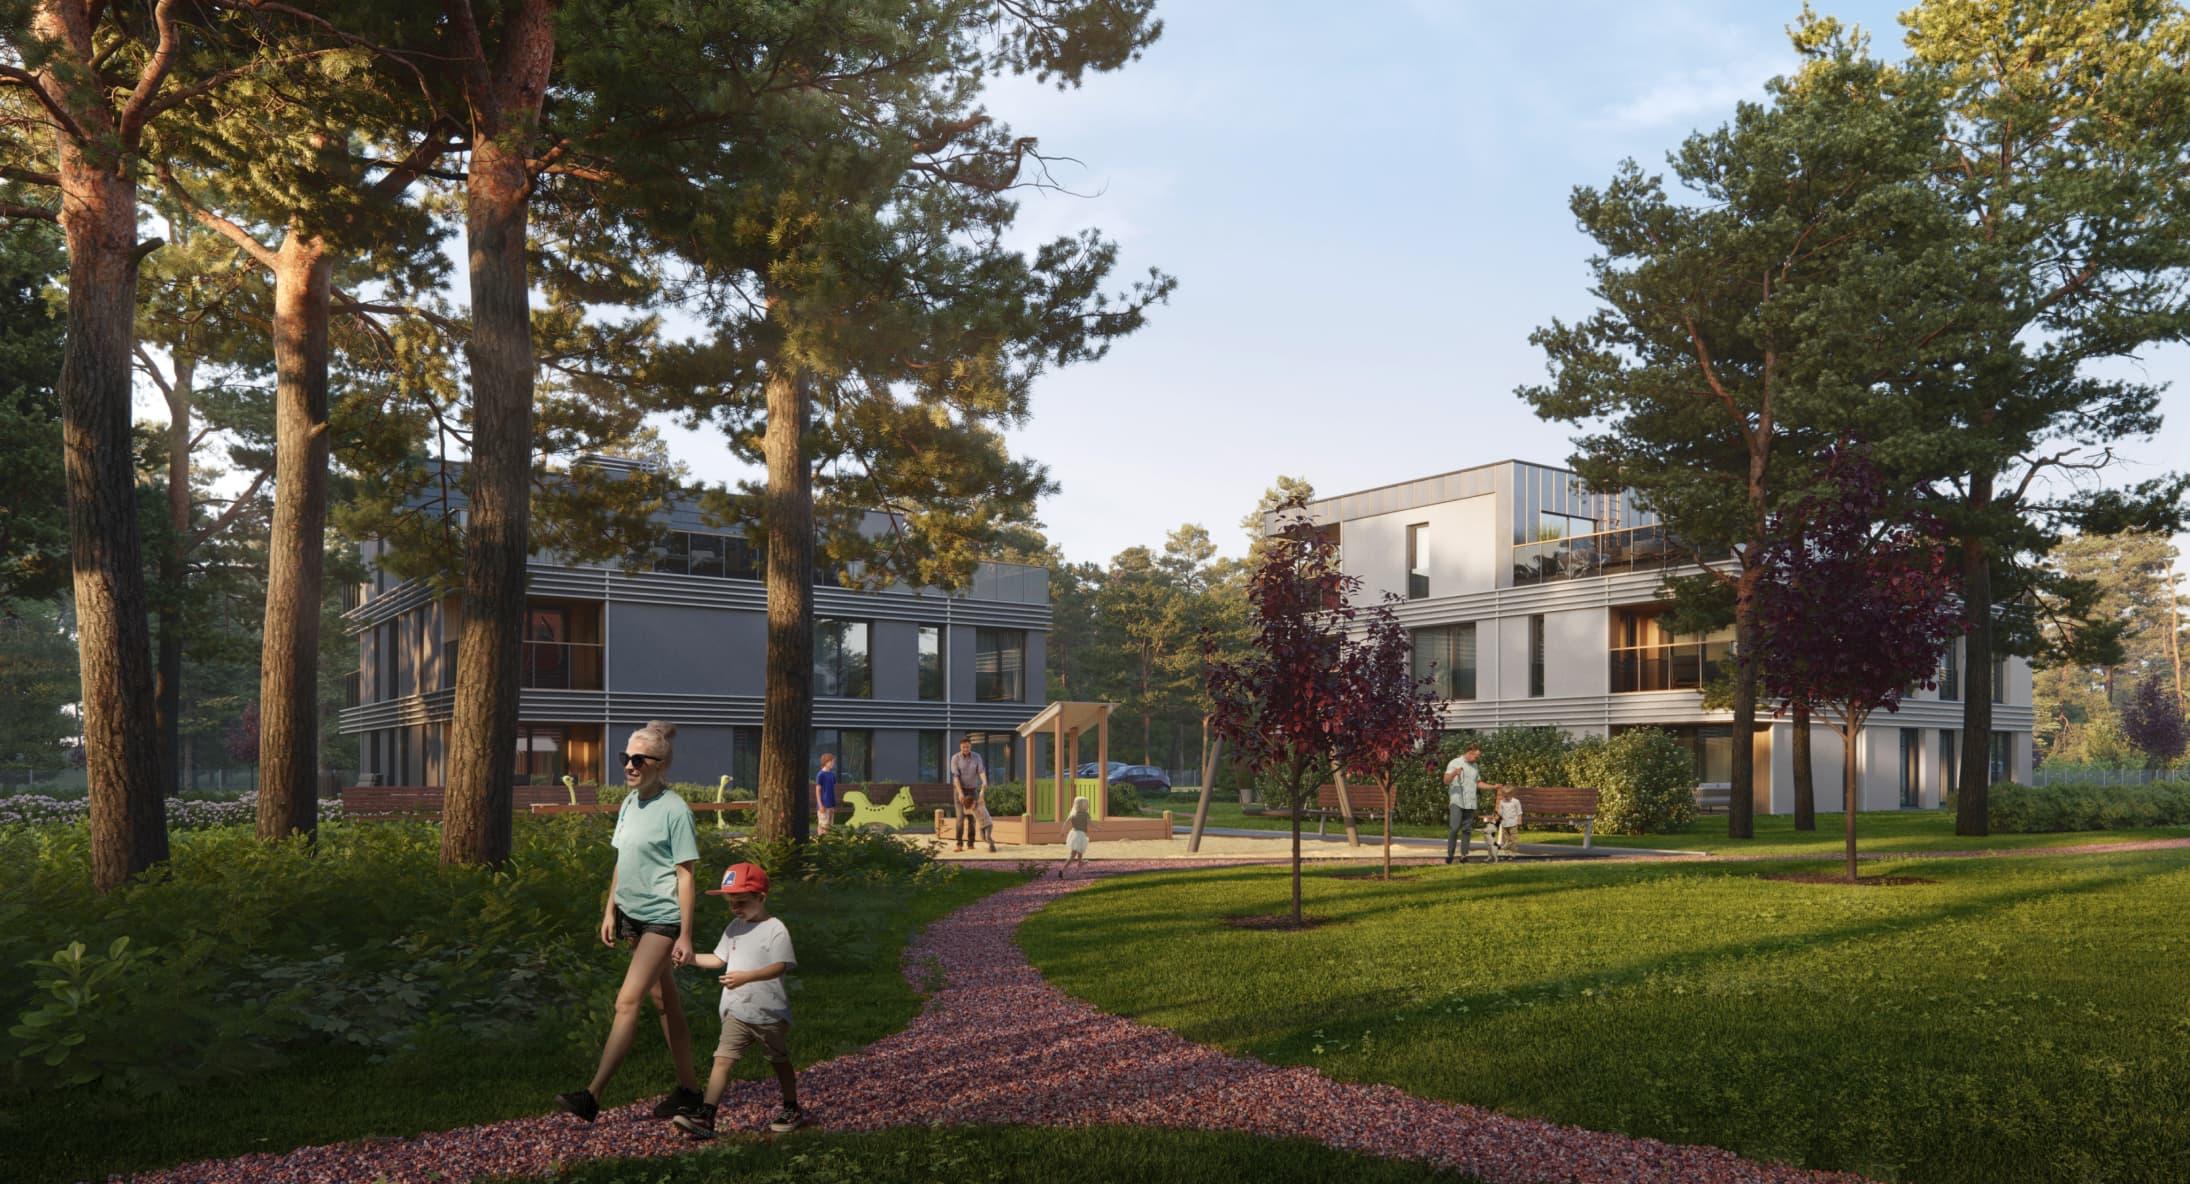 Nõmme Villas residential area – private and comfortable urban villas on the edge of a pine forest